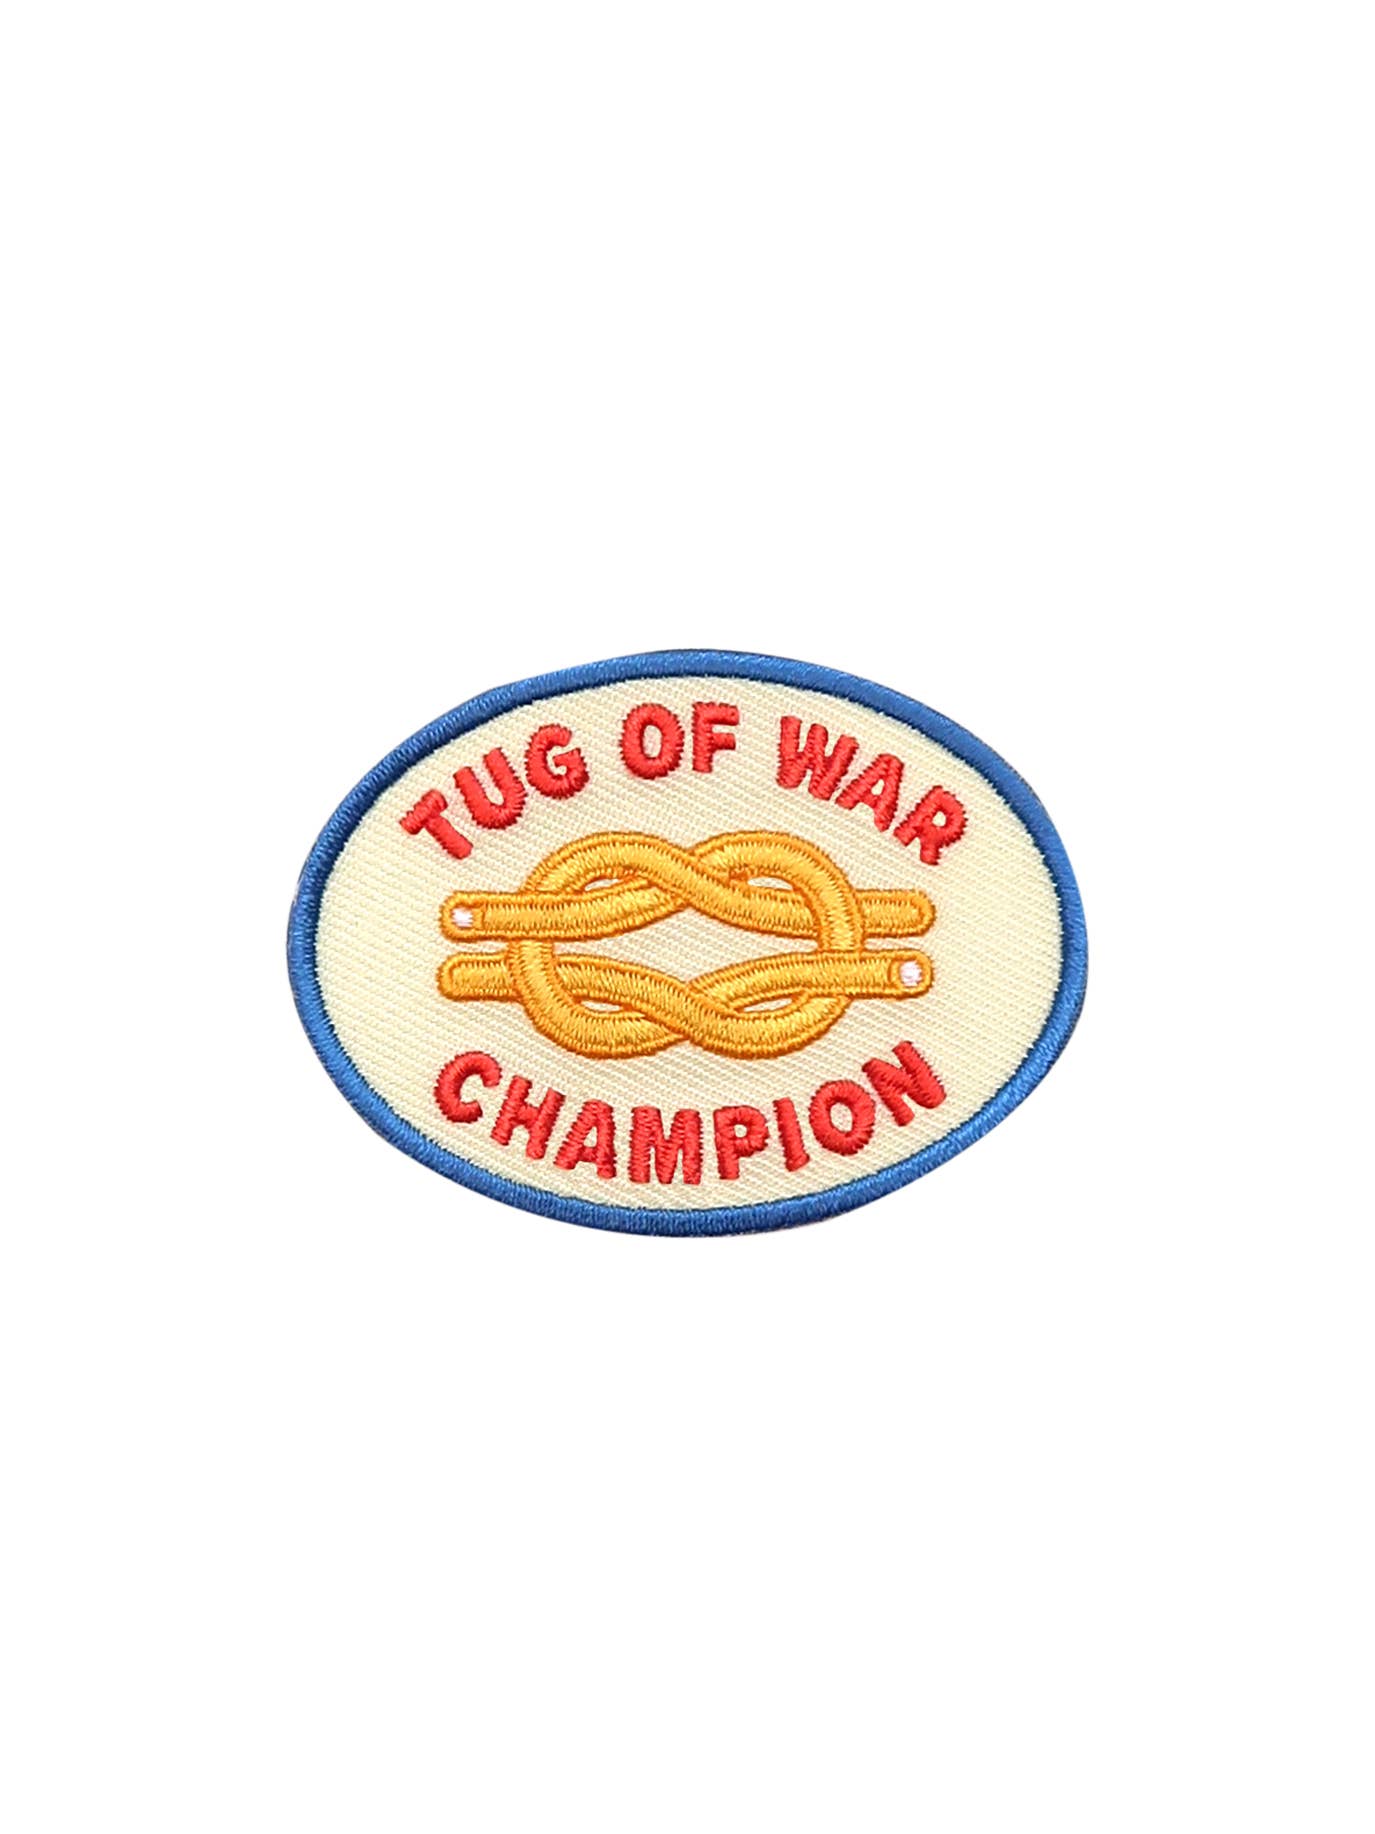 Tug of War Champion iron-on patch for dogs